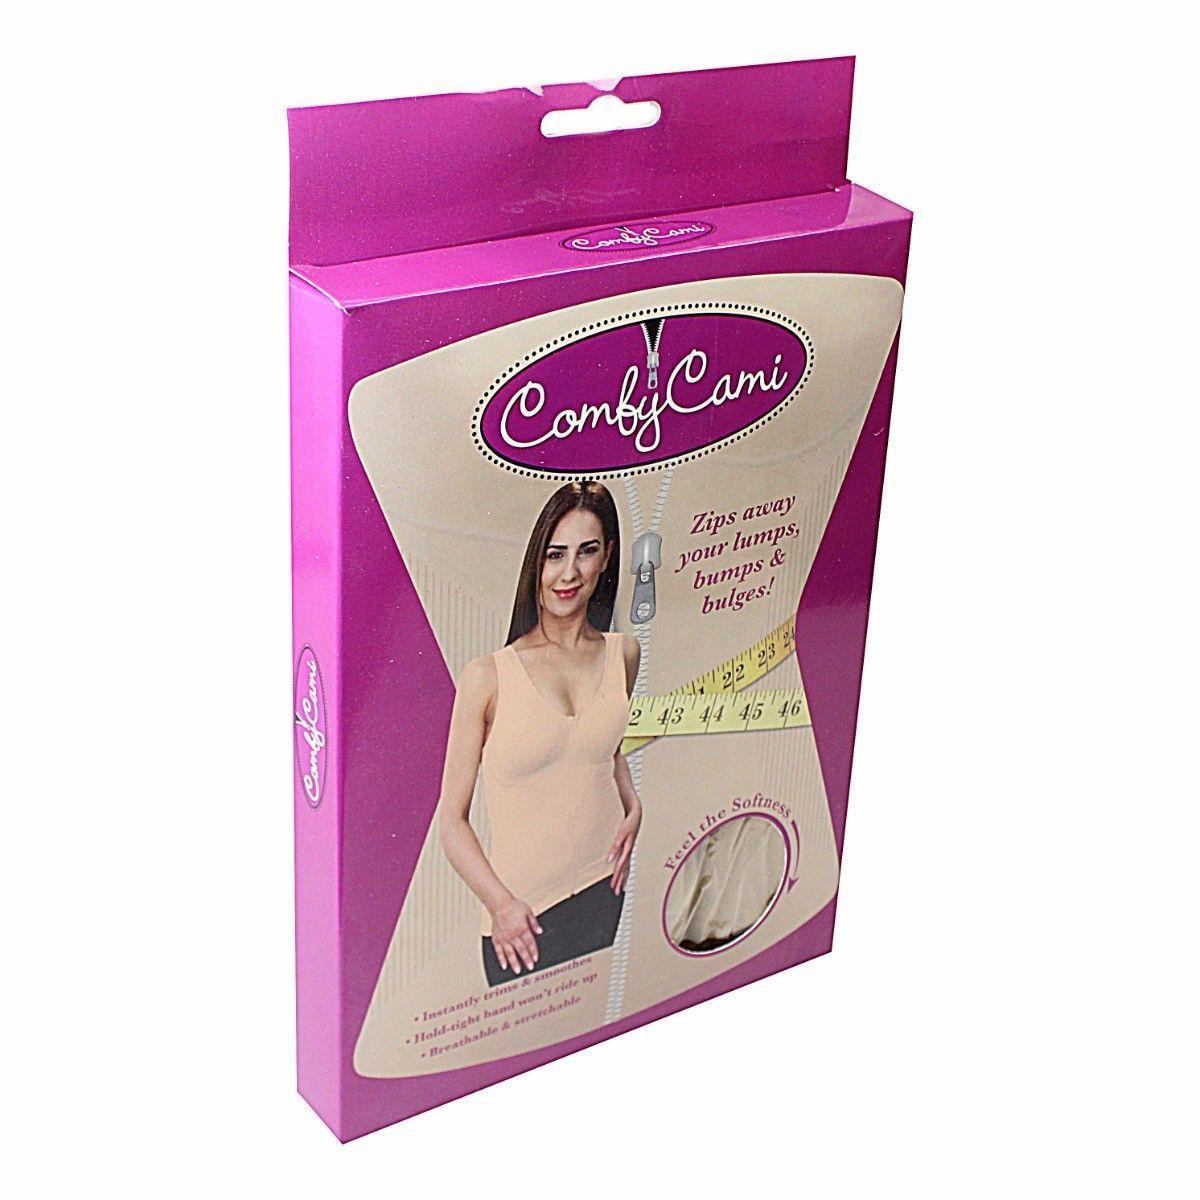 Comfi Camy Zip Away Your Lumps Bumps And Bulges Beauty 4173 (Parcel Rate)